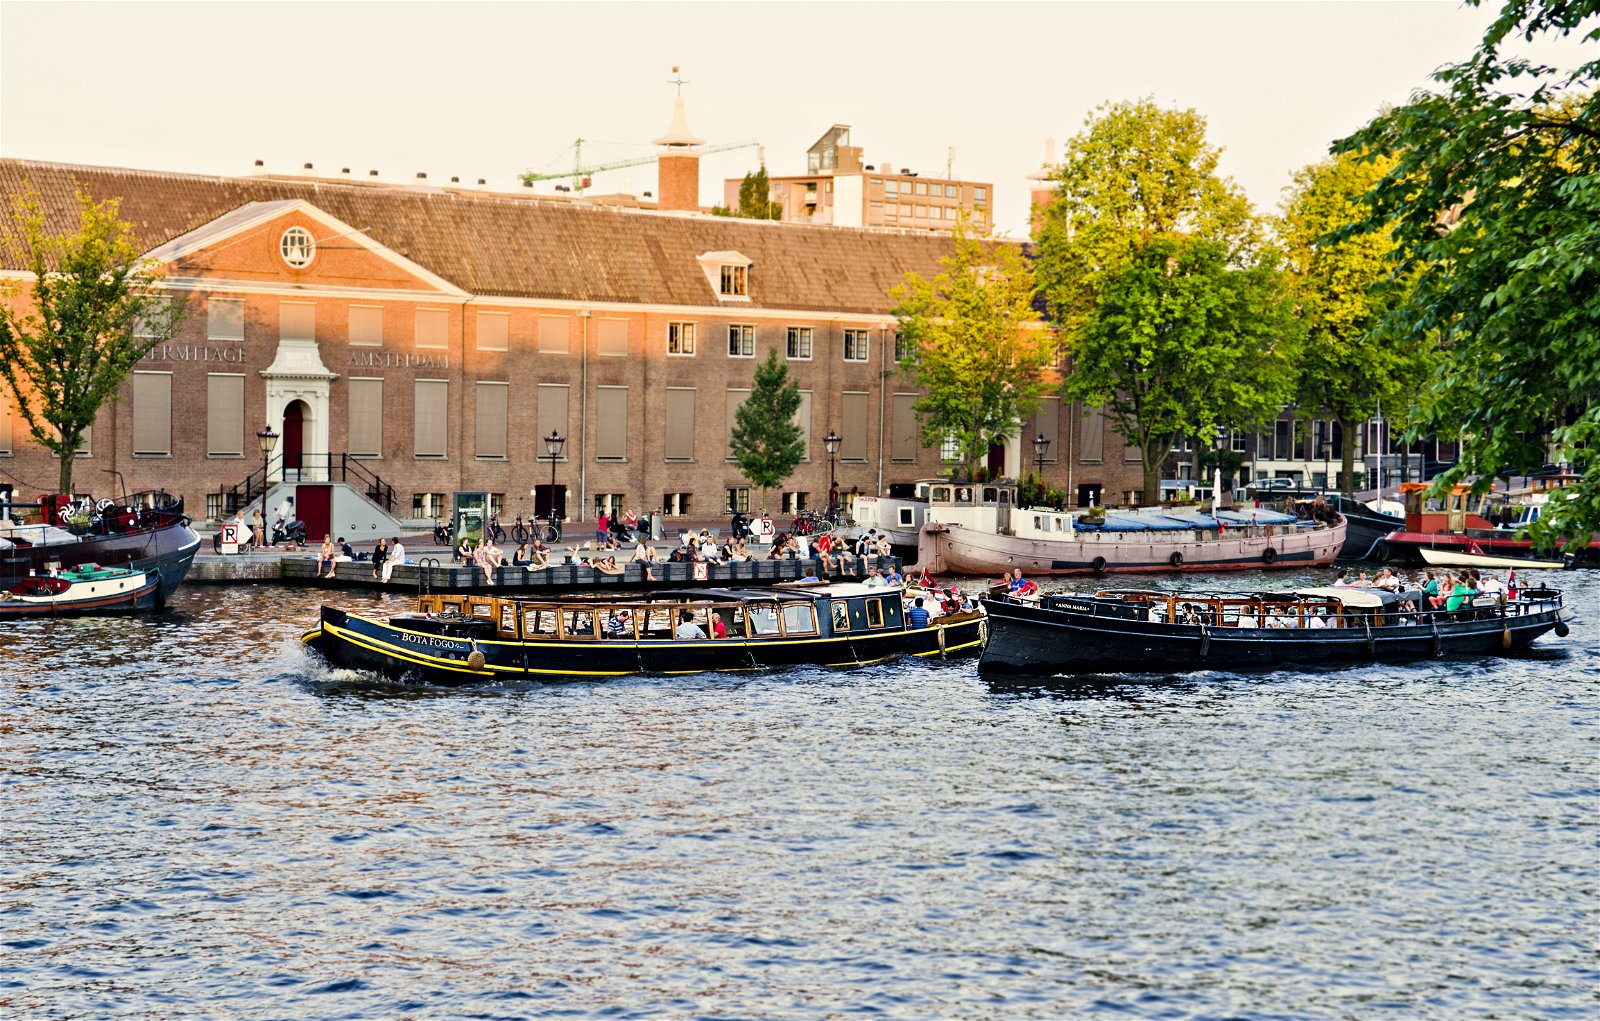 Two classic boats on Amstel canal